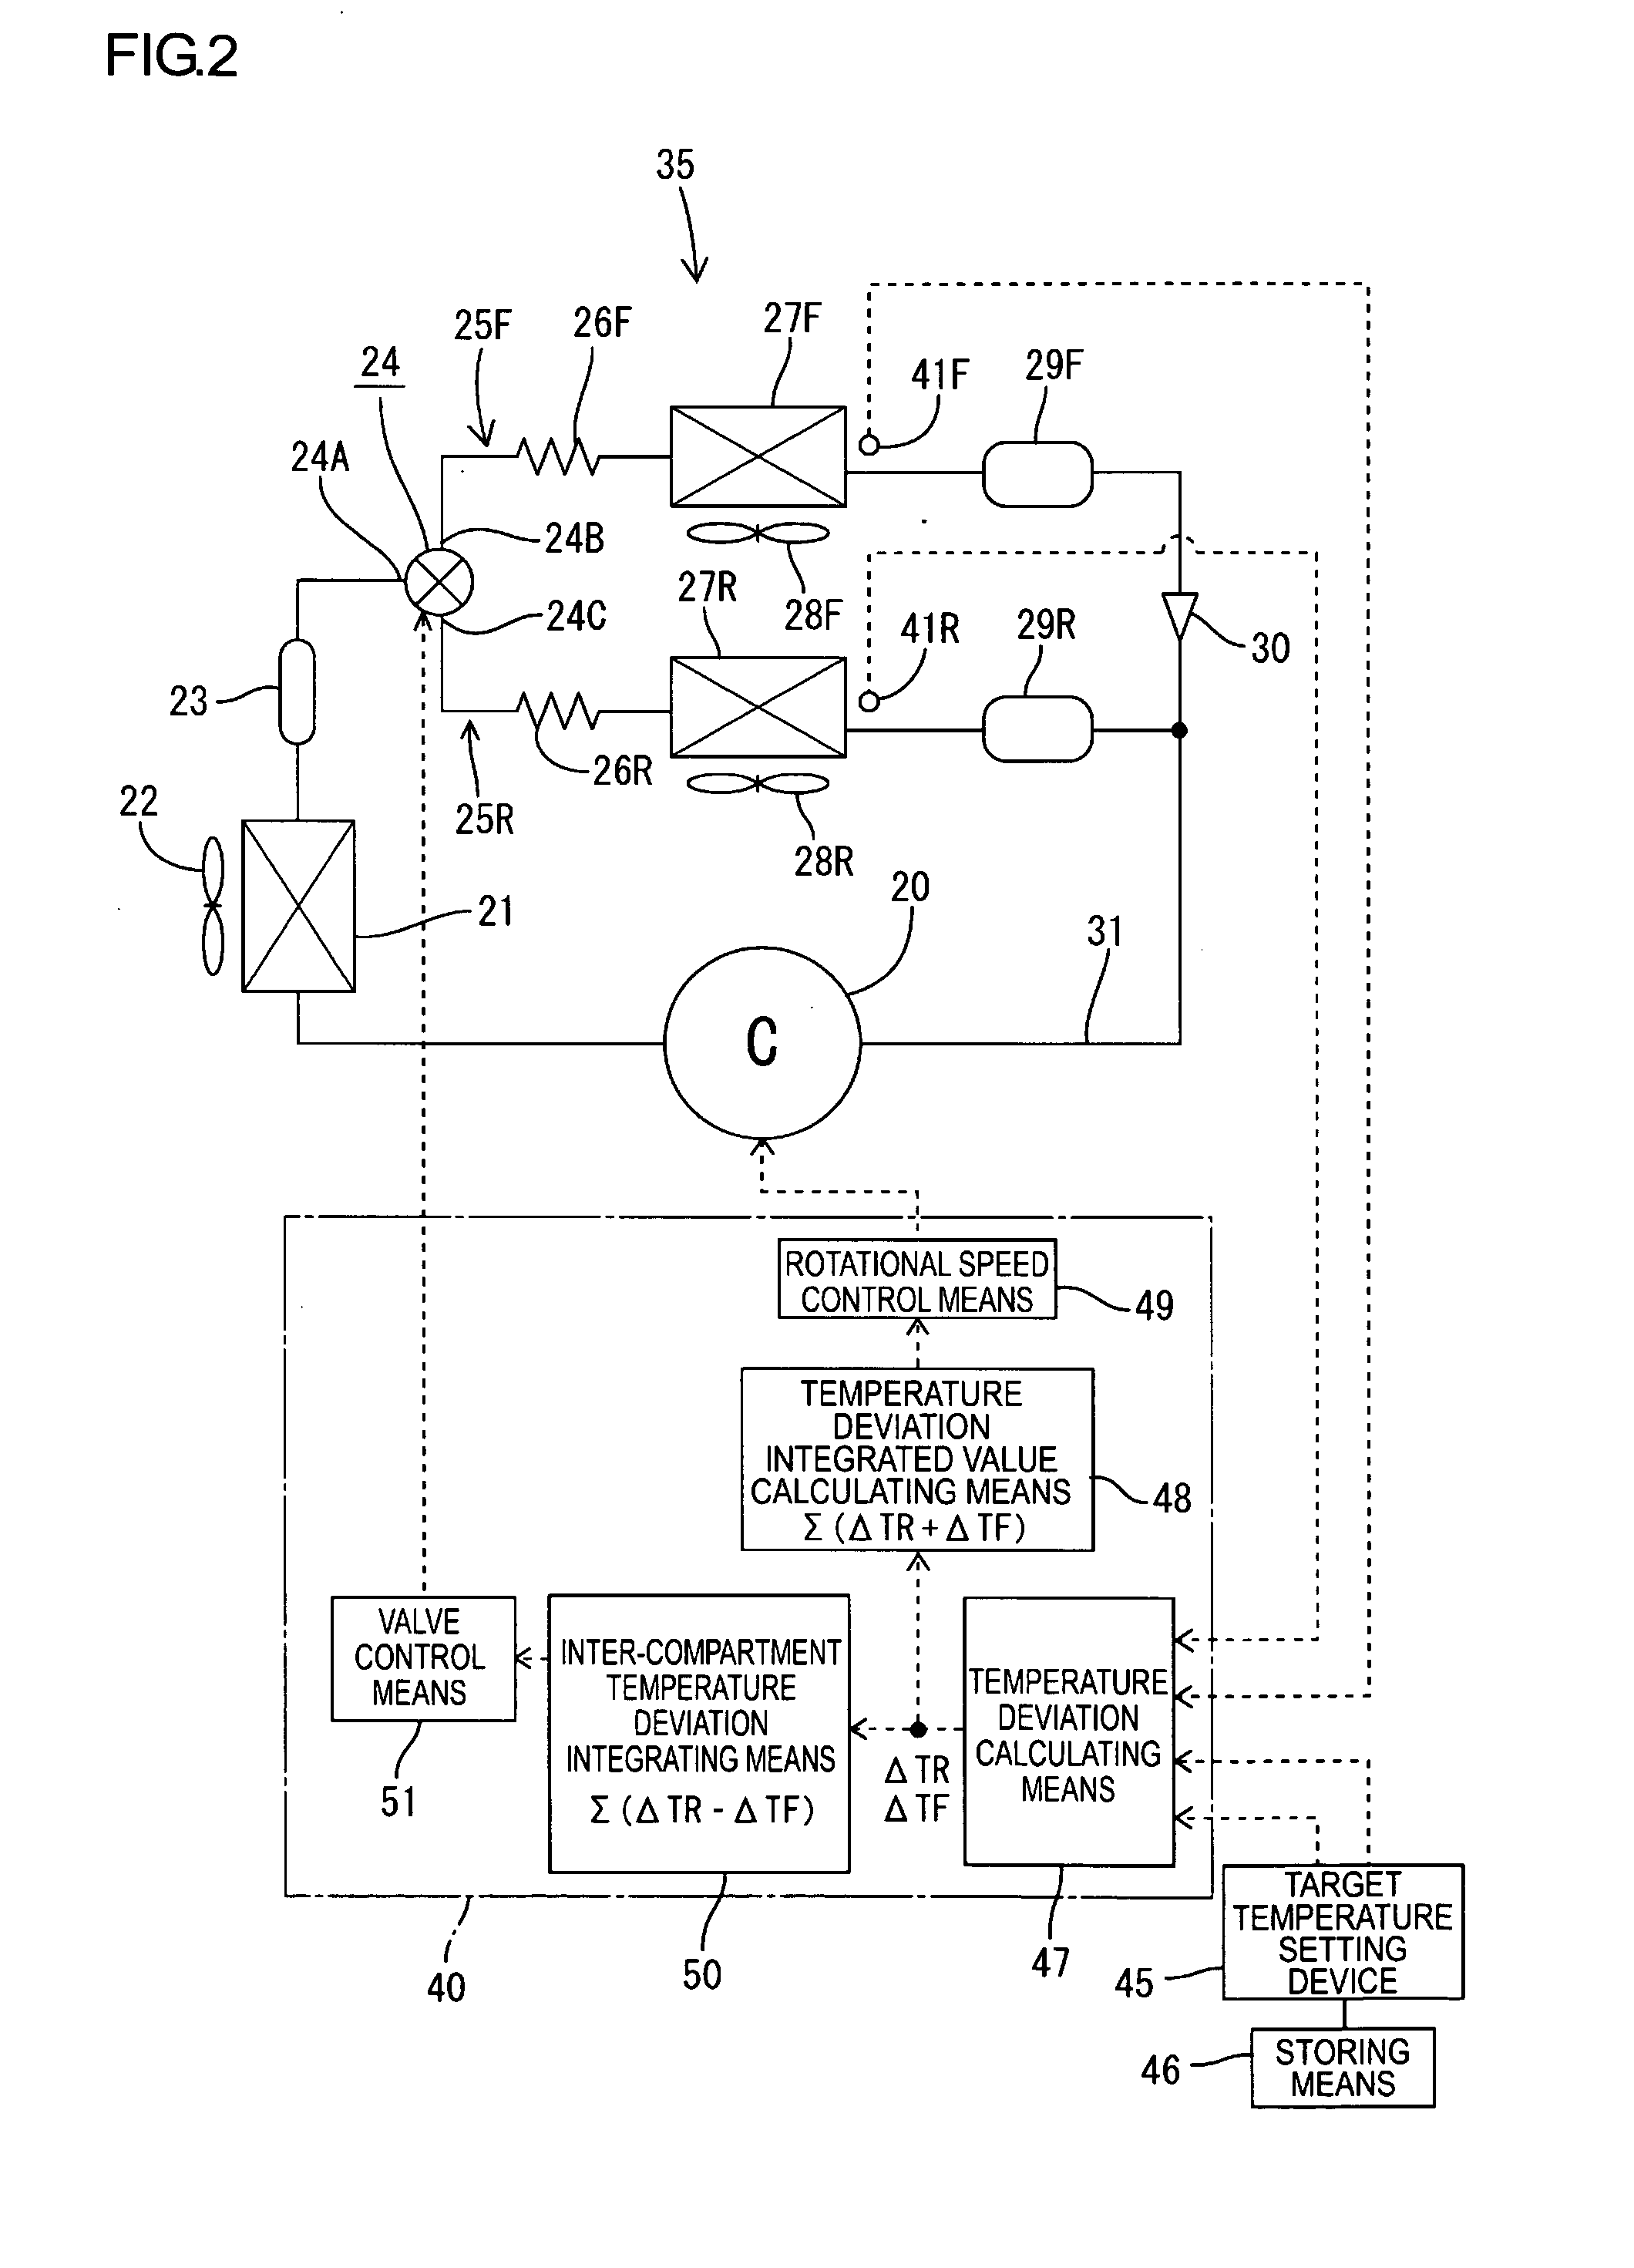 Cooling Storage Cabinet and Method of Operating Thereof